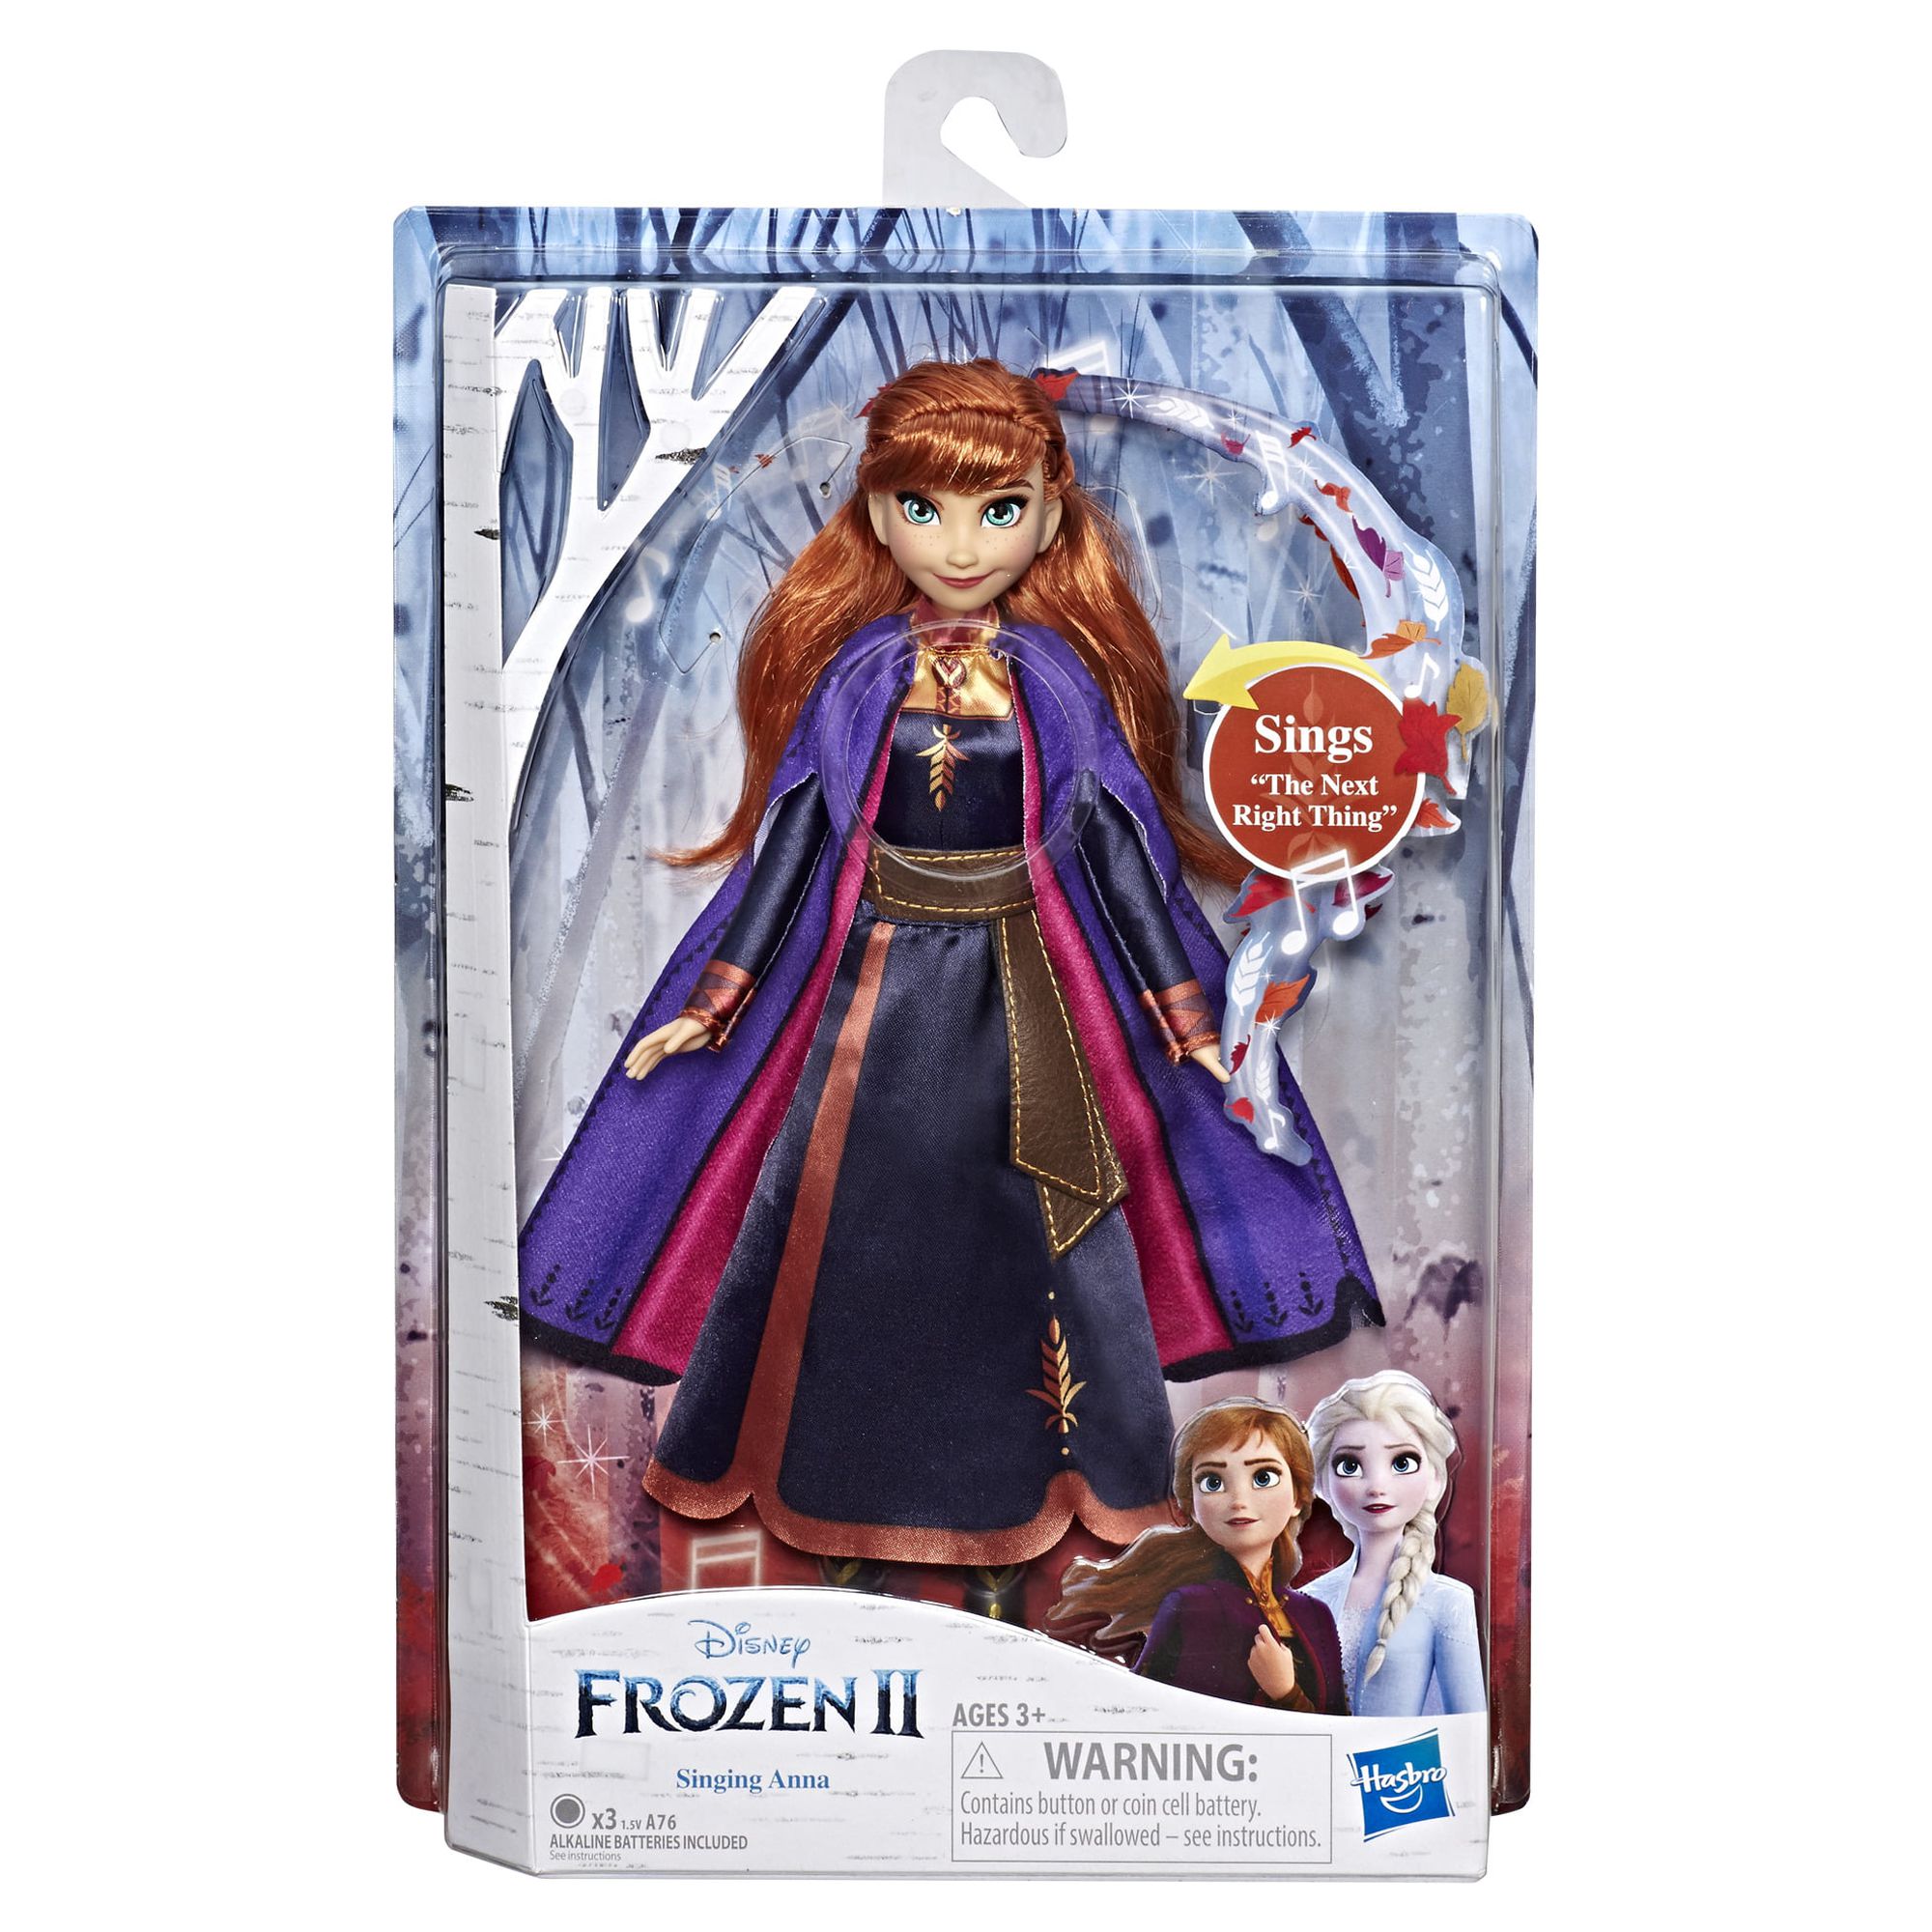 Disney Frozen 2 Singing Anna Musical Fashion Doll, Includes Purple Dress - image 3 of 8